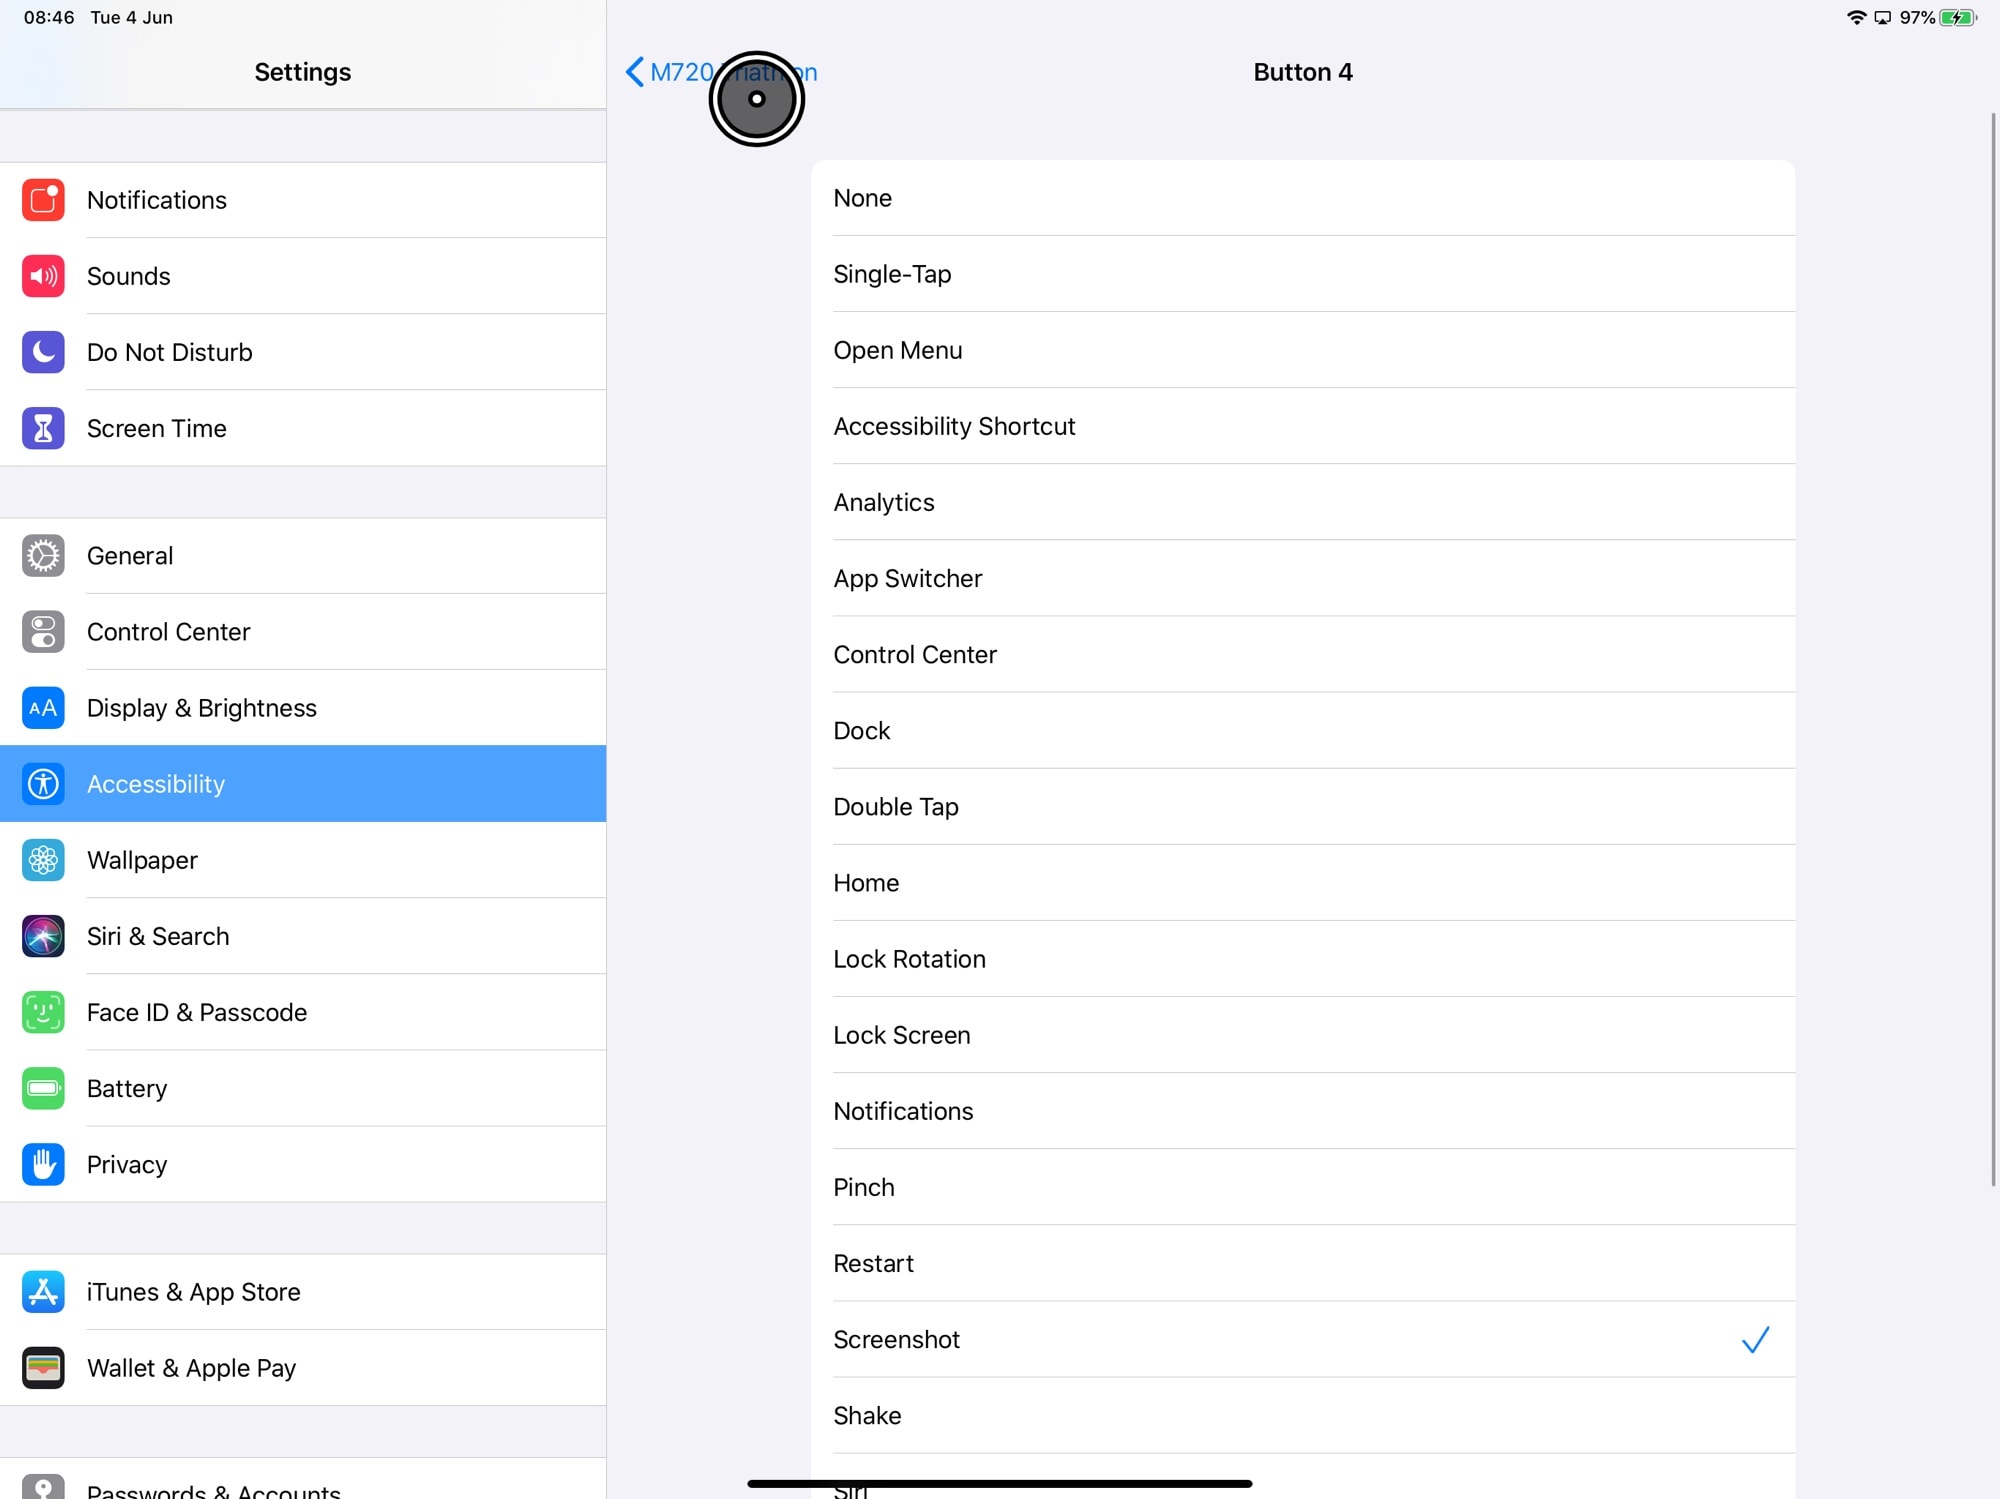 Look at all the options you can assign to mouse buttons in iPadOS